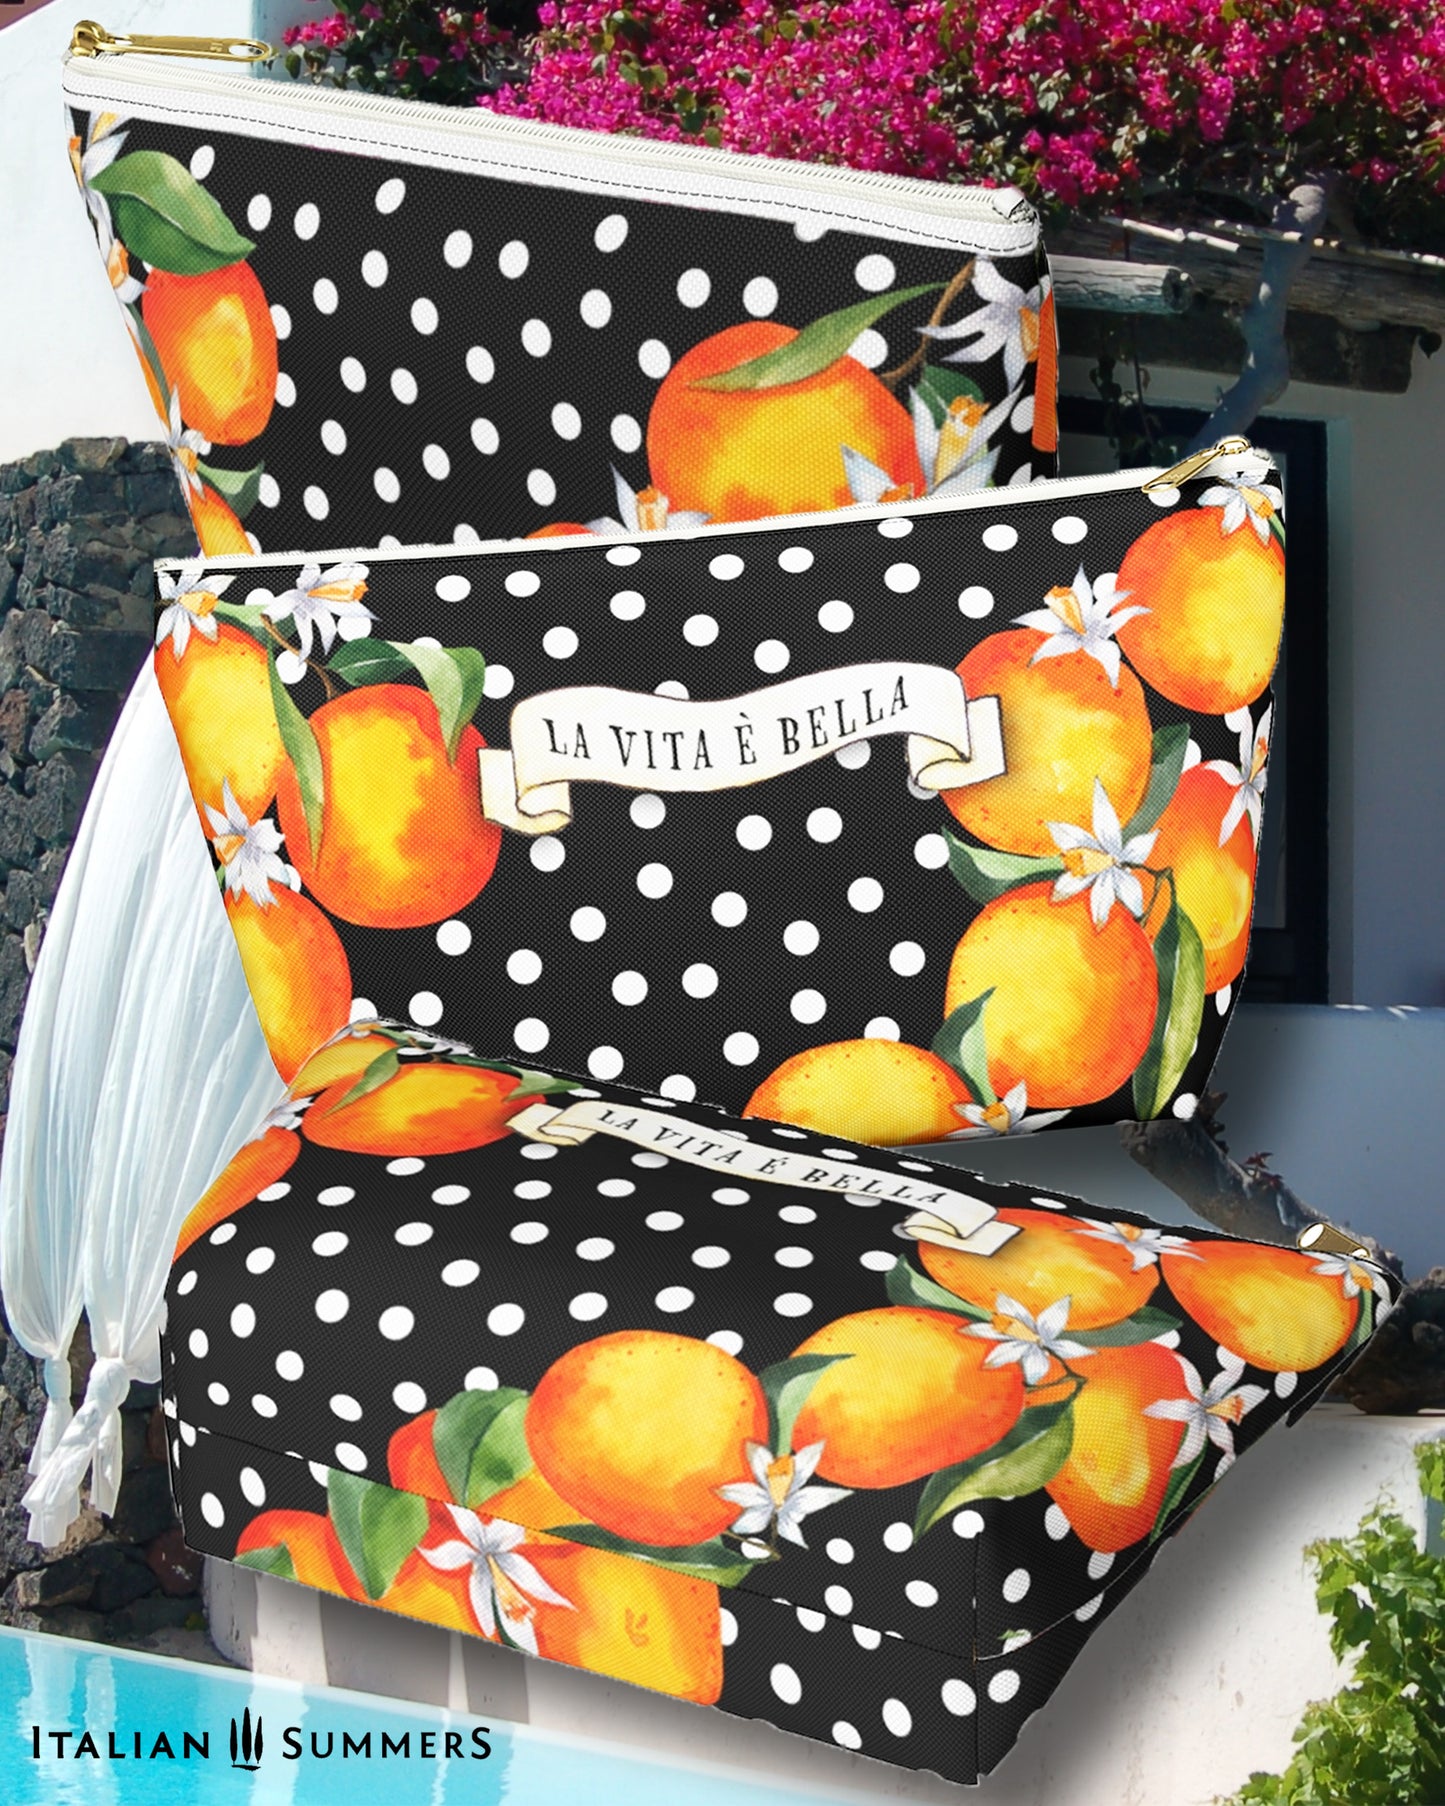 Italy inspired made to order clutch with zipper closure, printed and sewn together , decorated with Sicilian oranges and blooms on a black field with white polka dots. Made by Italian Summers 